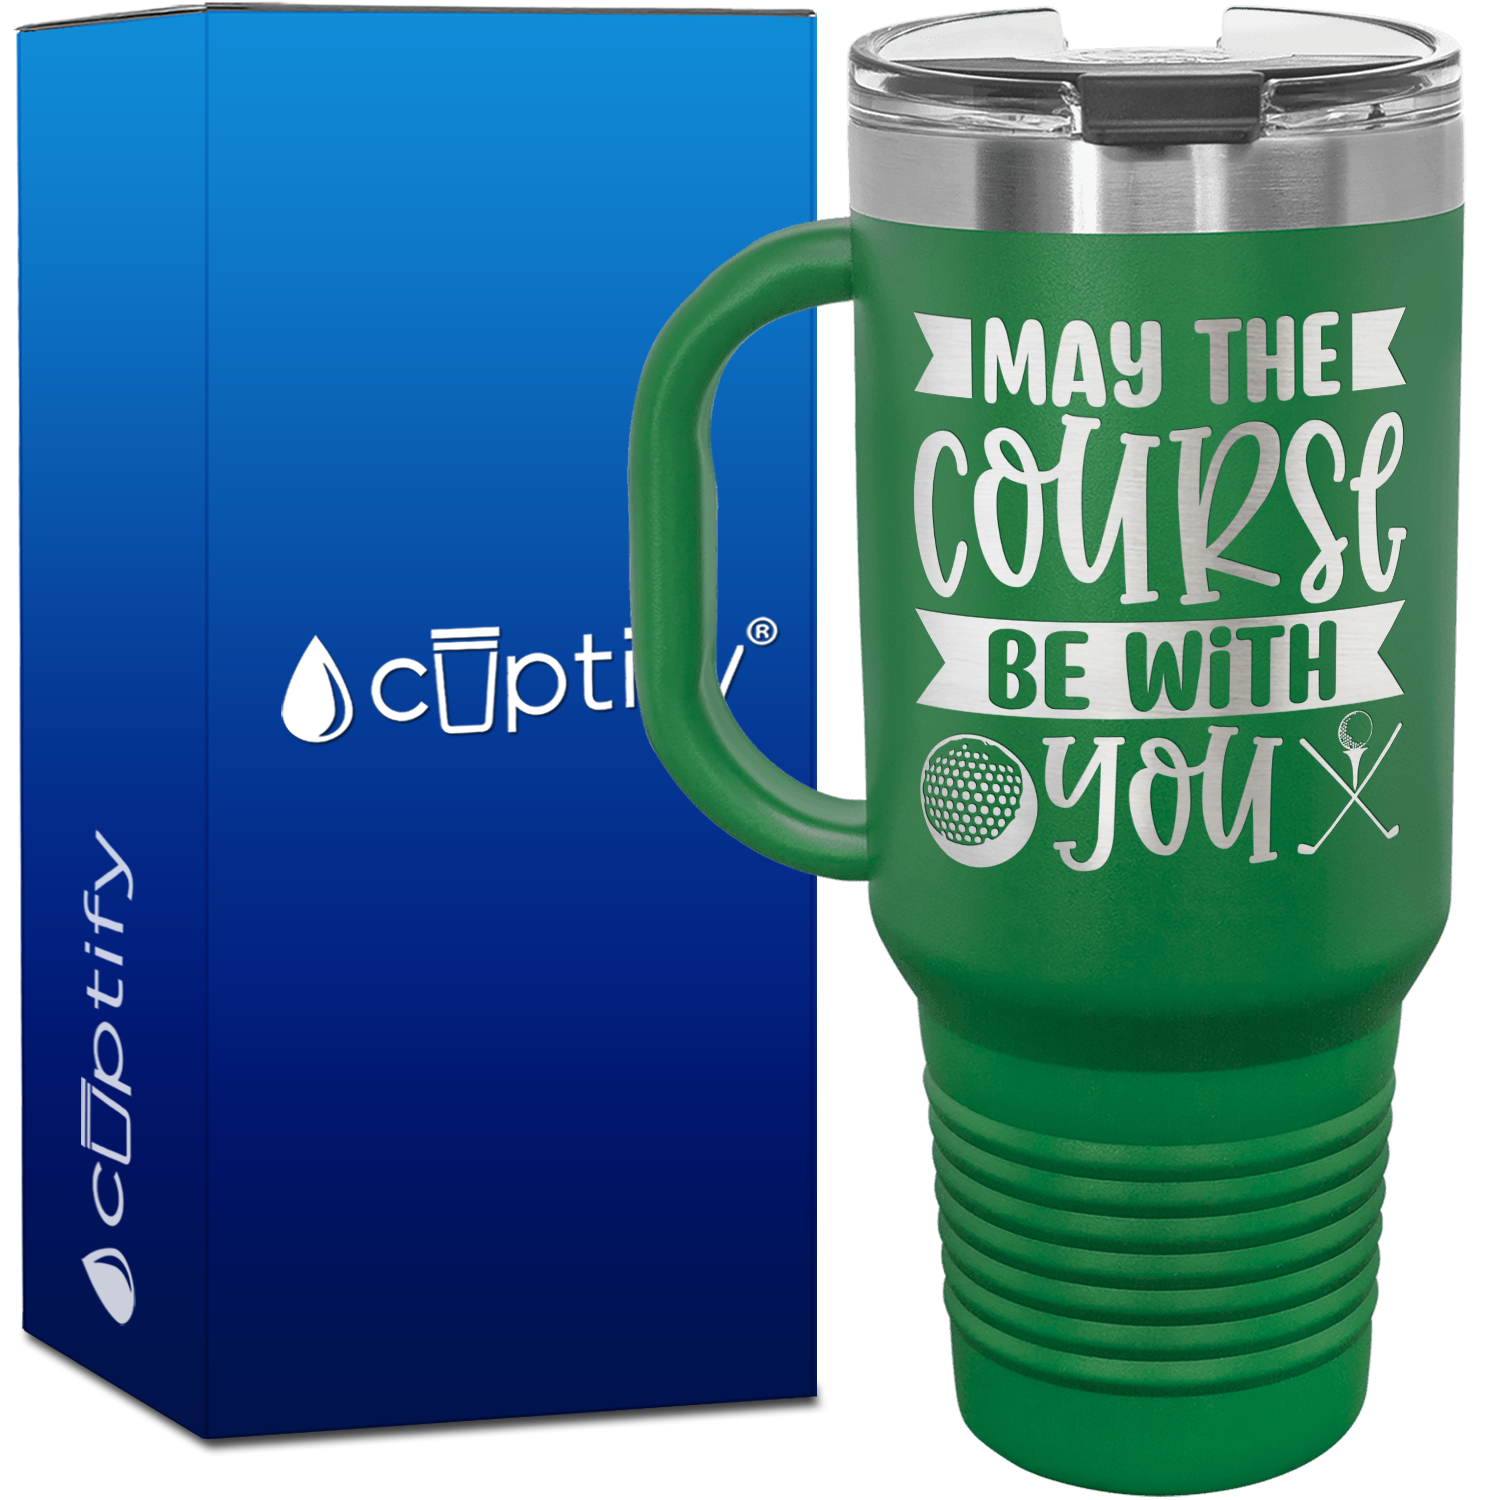 May the Course Be With You 40oz Golf Travel Mug